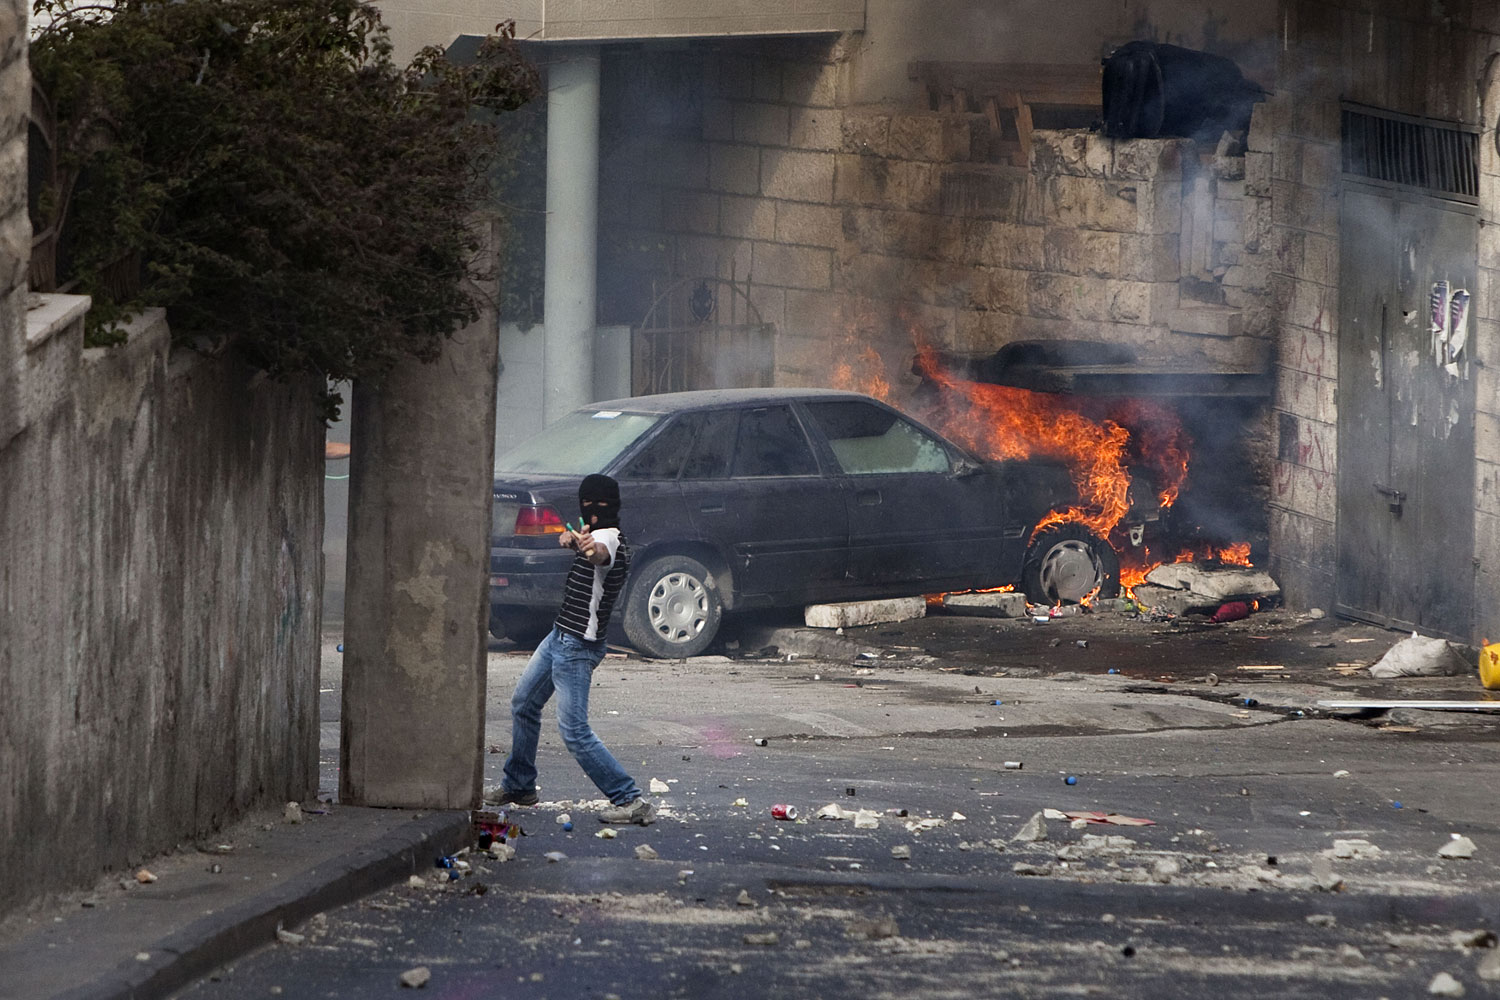 A Palestinian youth throws stones at Israeli police. Clashes erupted in East Jerusalem after Friday prayers and lasted several hours, before undercover police moved in to arrest the protesters.